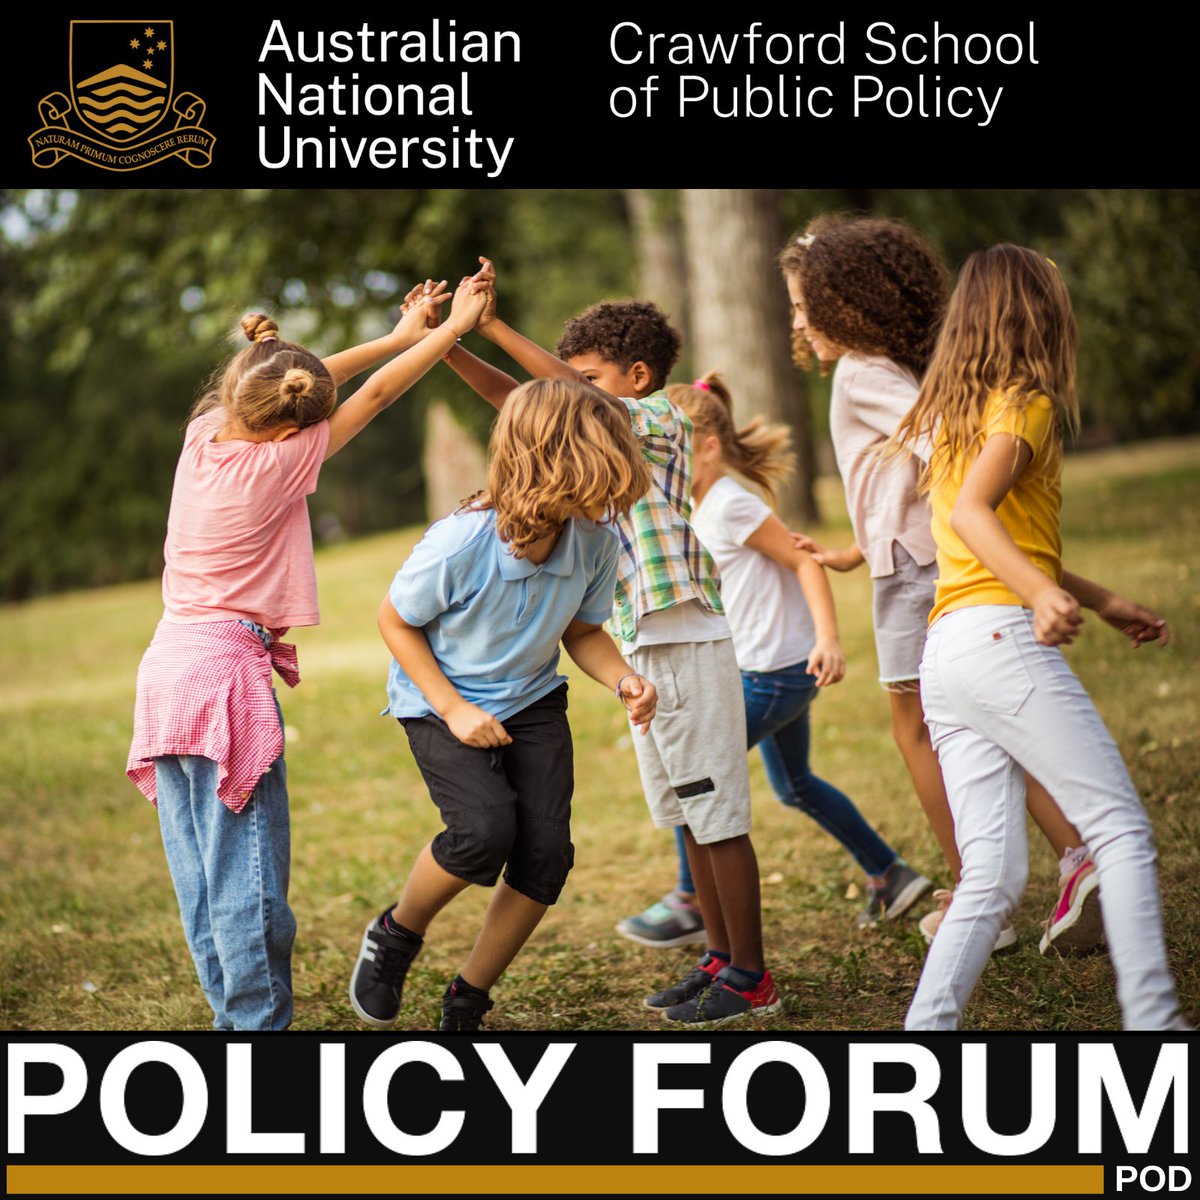 In case you missed it, check out @BessellSharon’s episode on #PolicyForumPod. She looks at how Robodebt became an acceptable policy, why child poverty is allowed, and she gives us hope for the future. Listen here: bit.ly/SharonBessell @Cbr_heartdoc